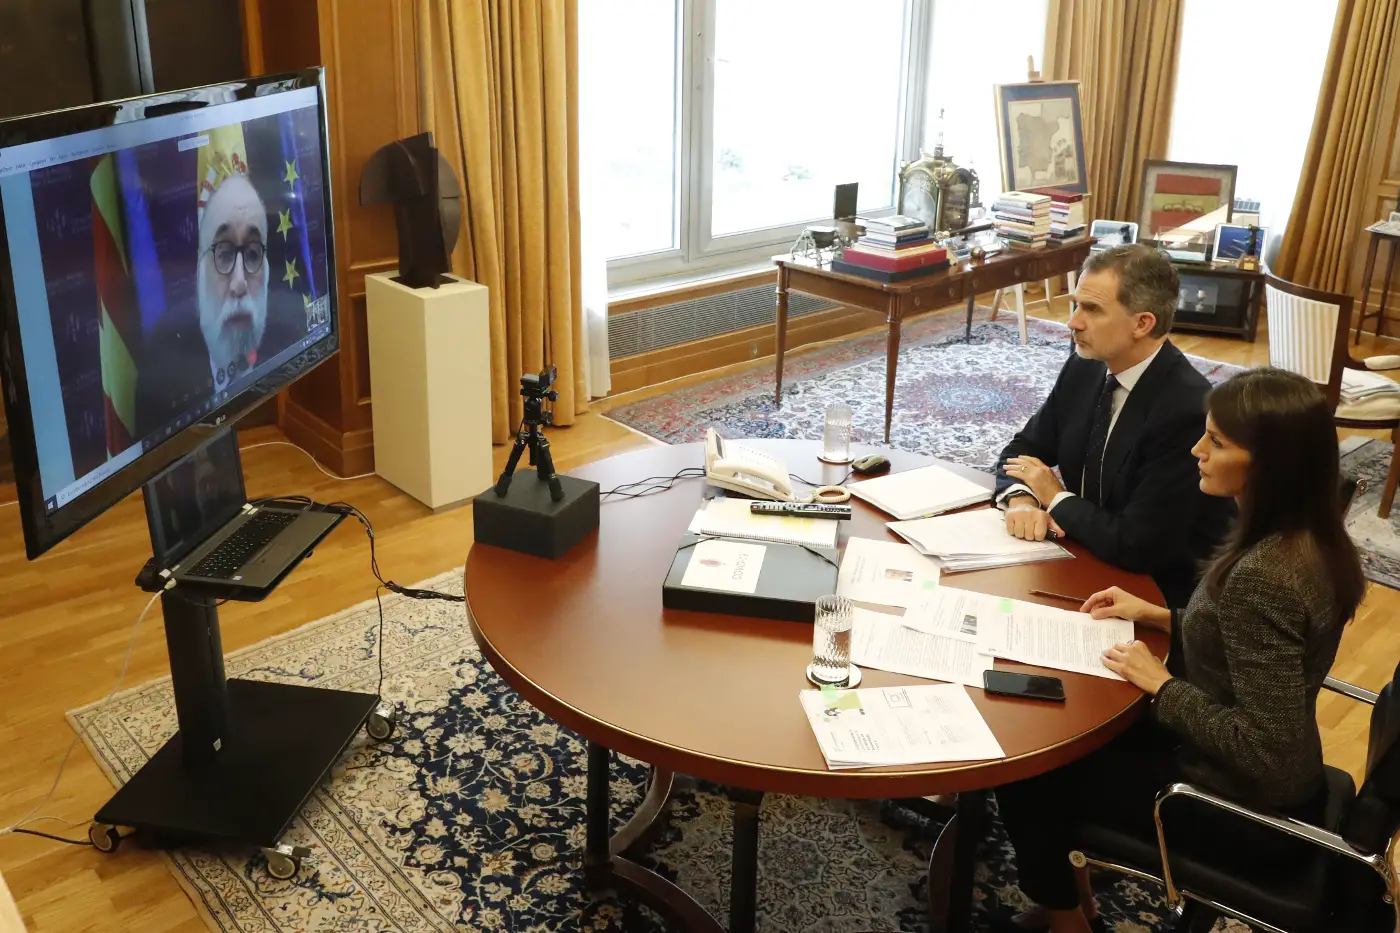 King Felipe and Queen Letizia's work from home routine continues